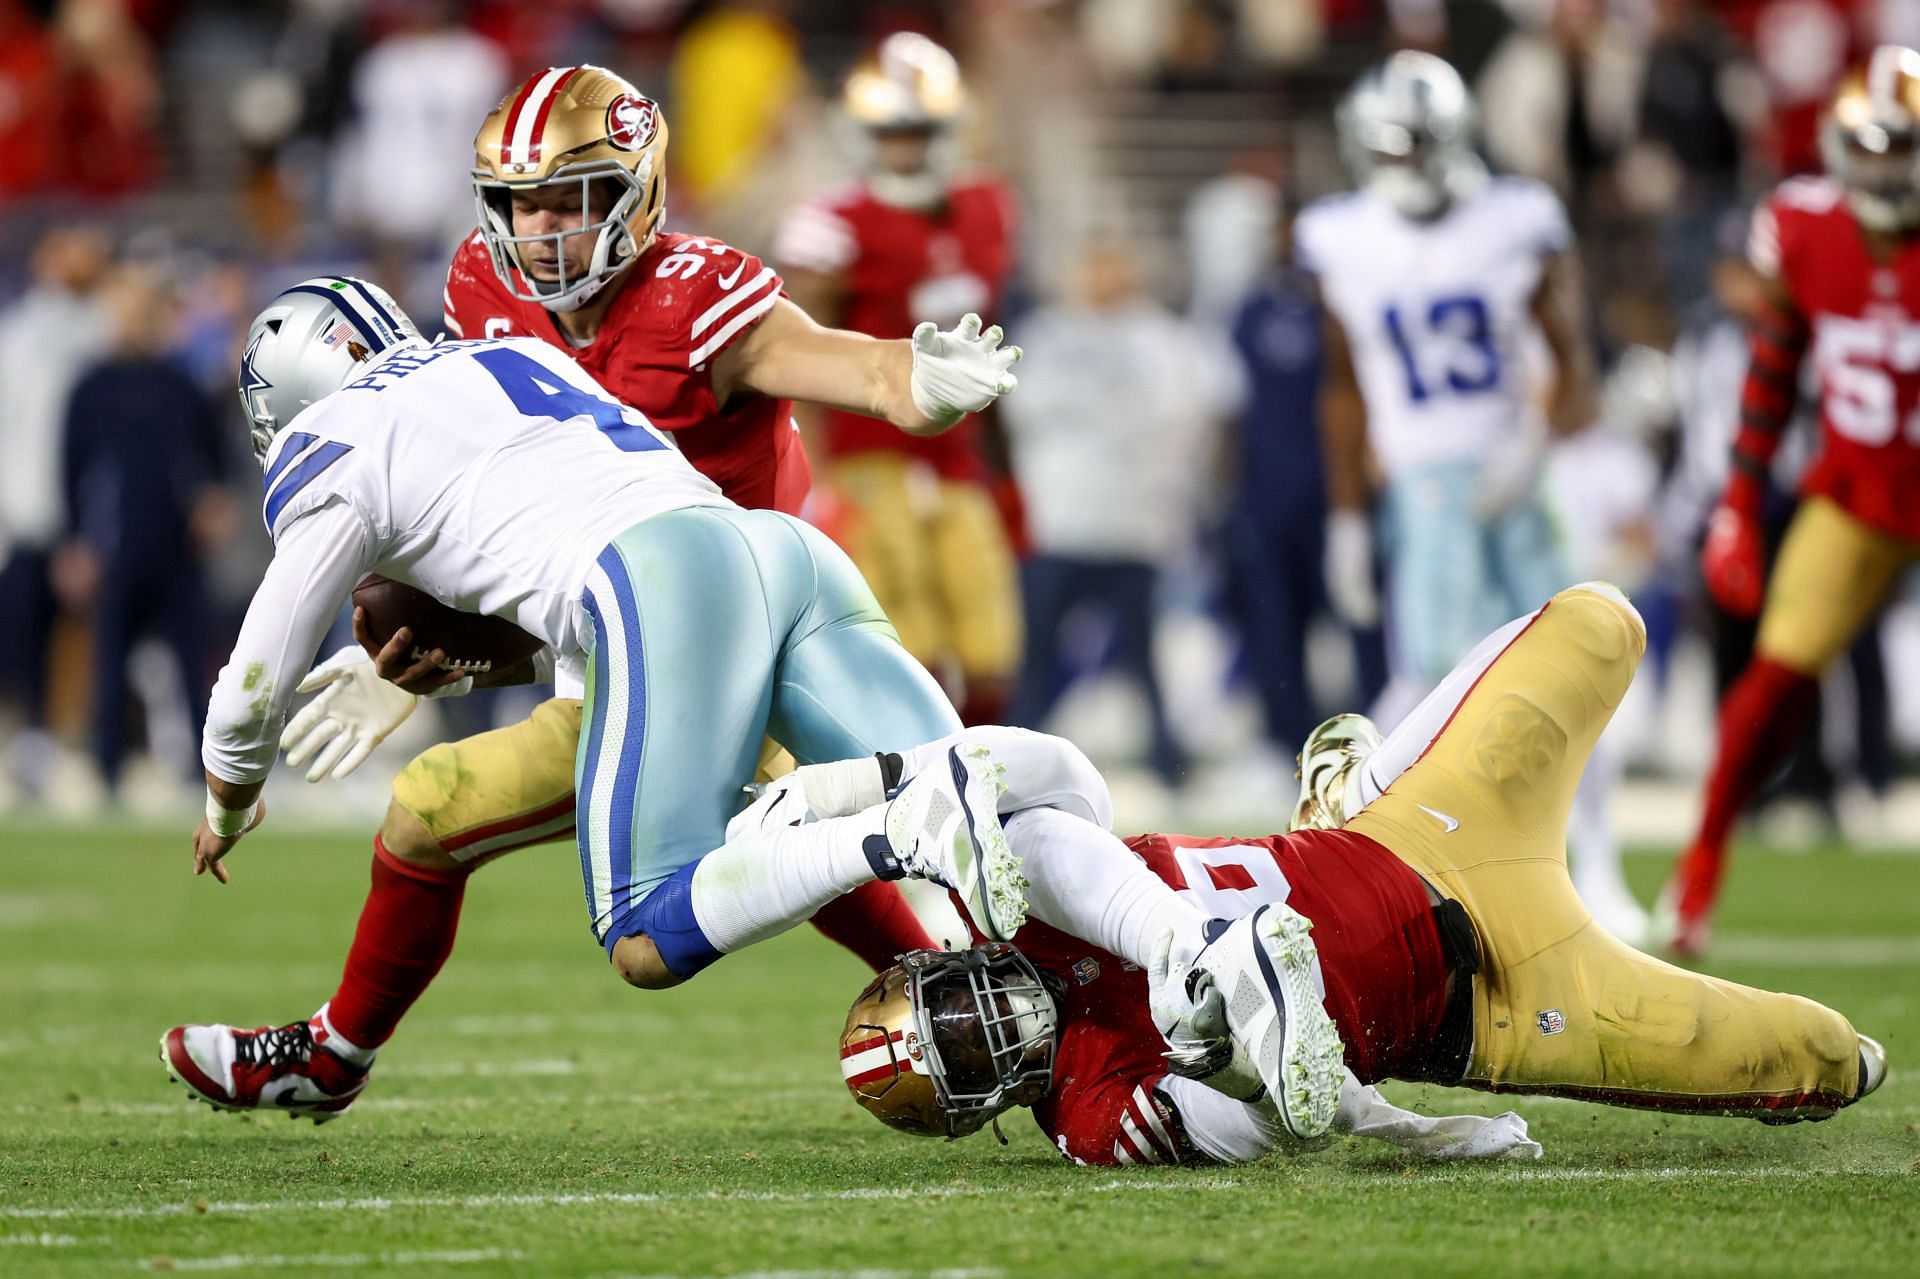 Nick Bosa and Samson Ebukam of the San Francisco 49ers tackle Dak Prescott of the Dallas Cowboys during the fourth quarter in the NFC Divisional Playoff game